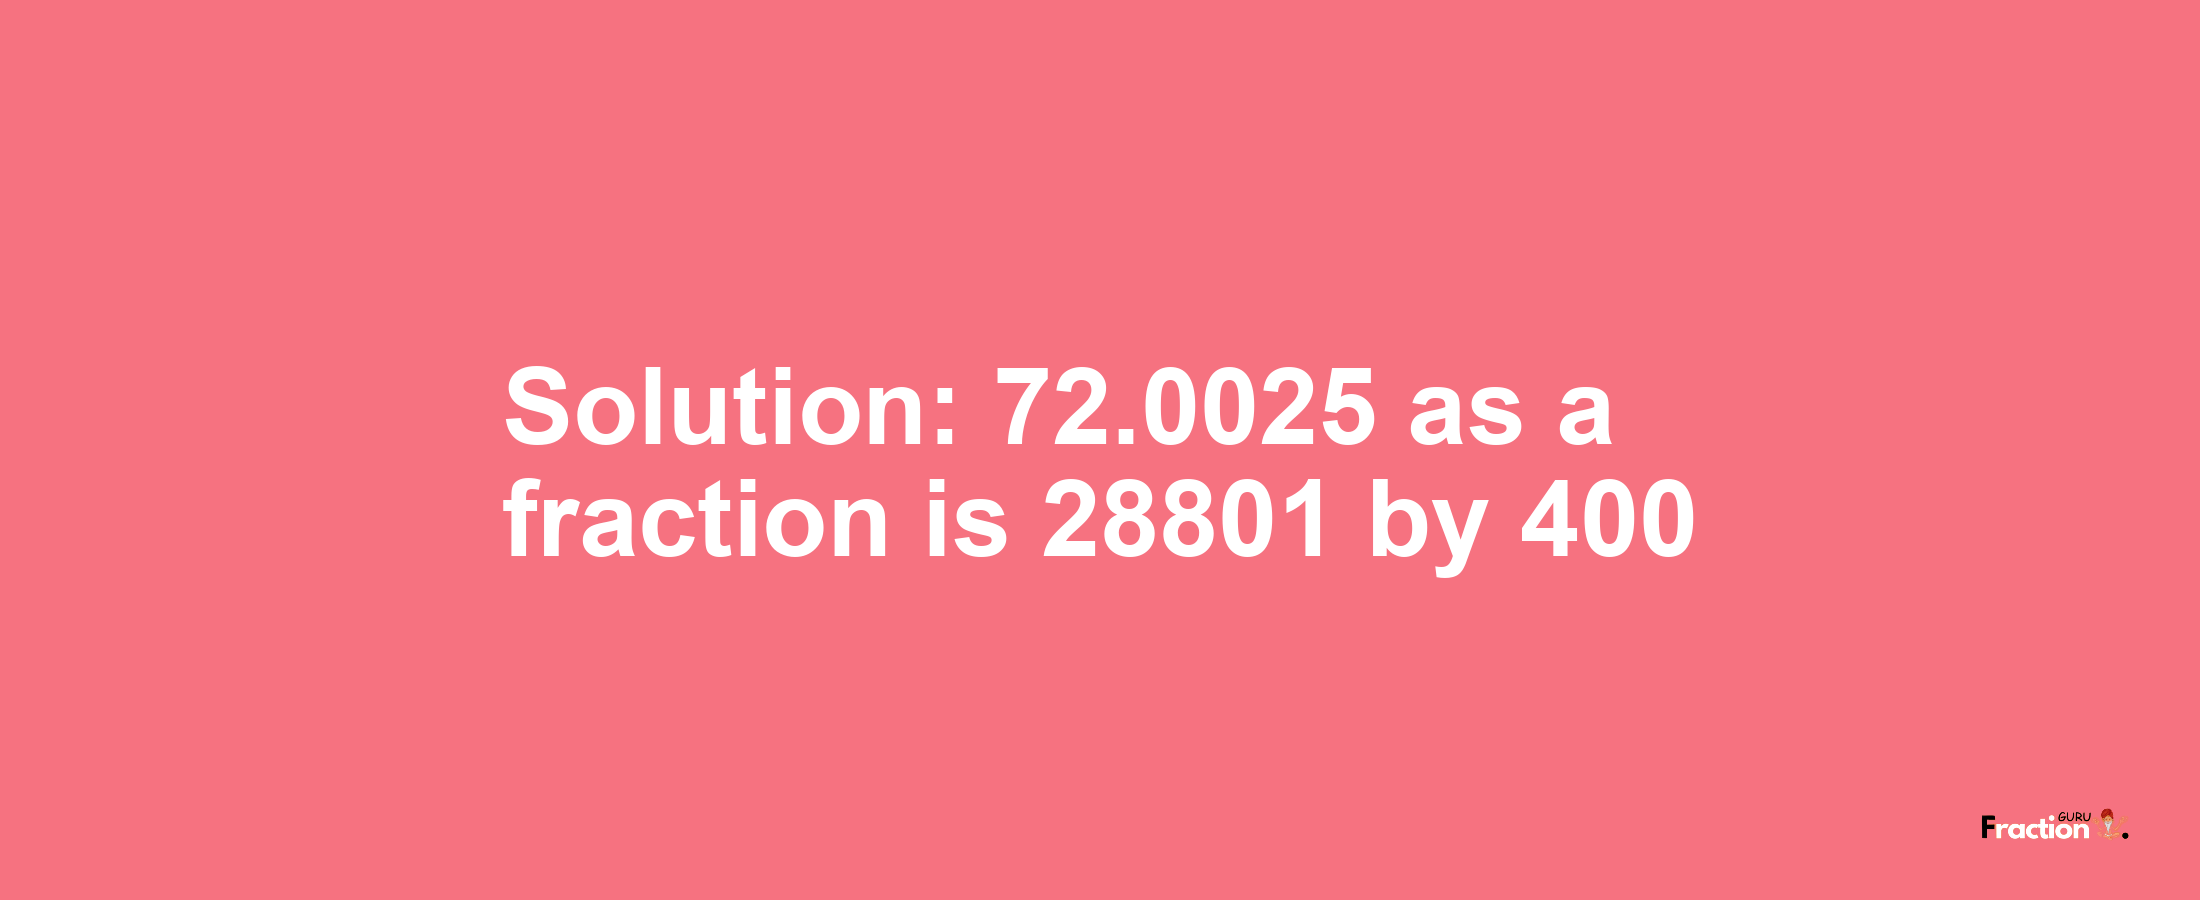 Solution:72.0025 as a fraction is 28801/400